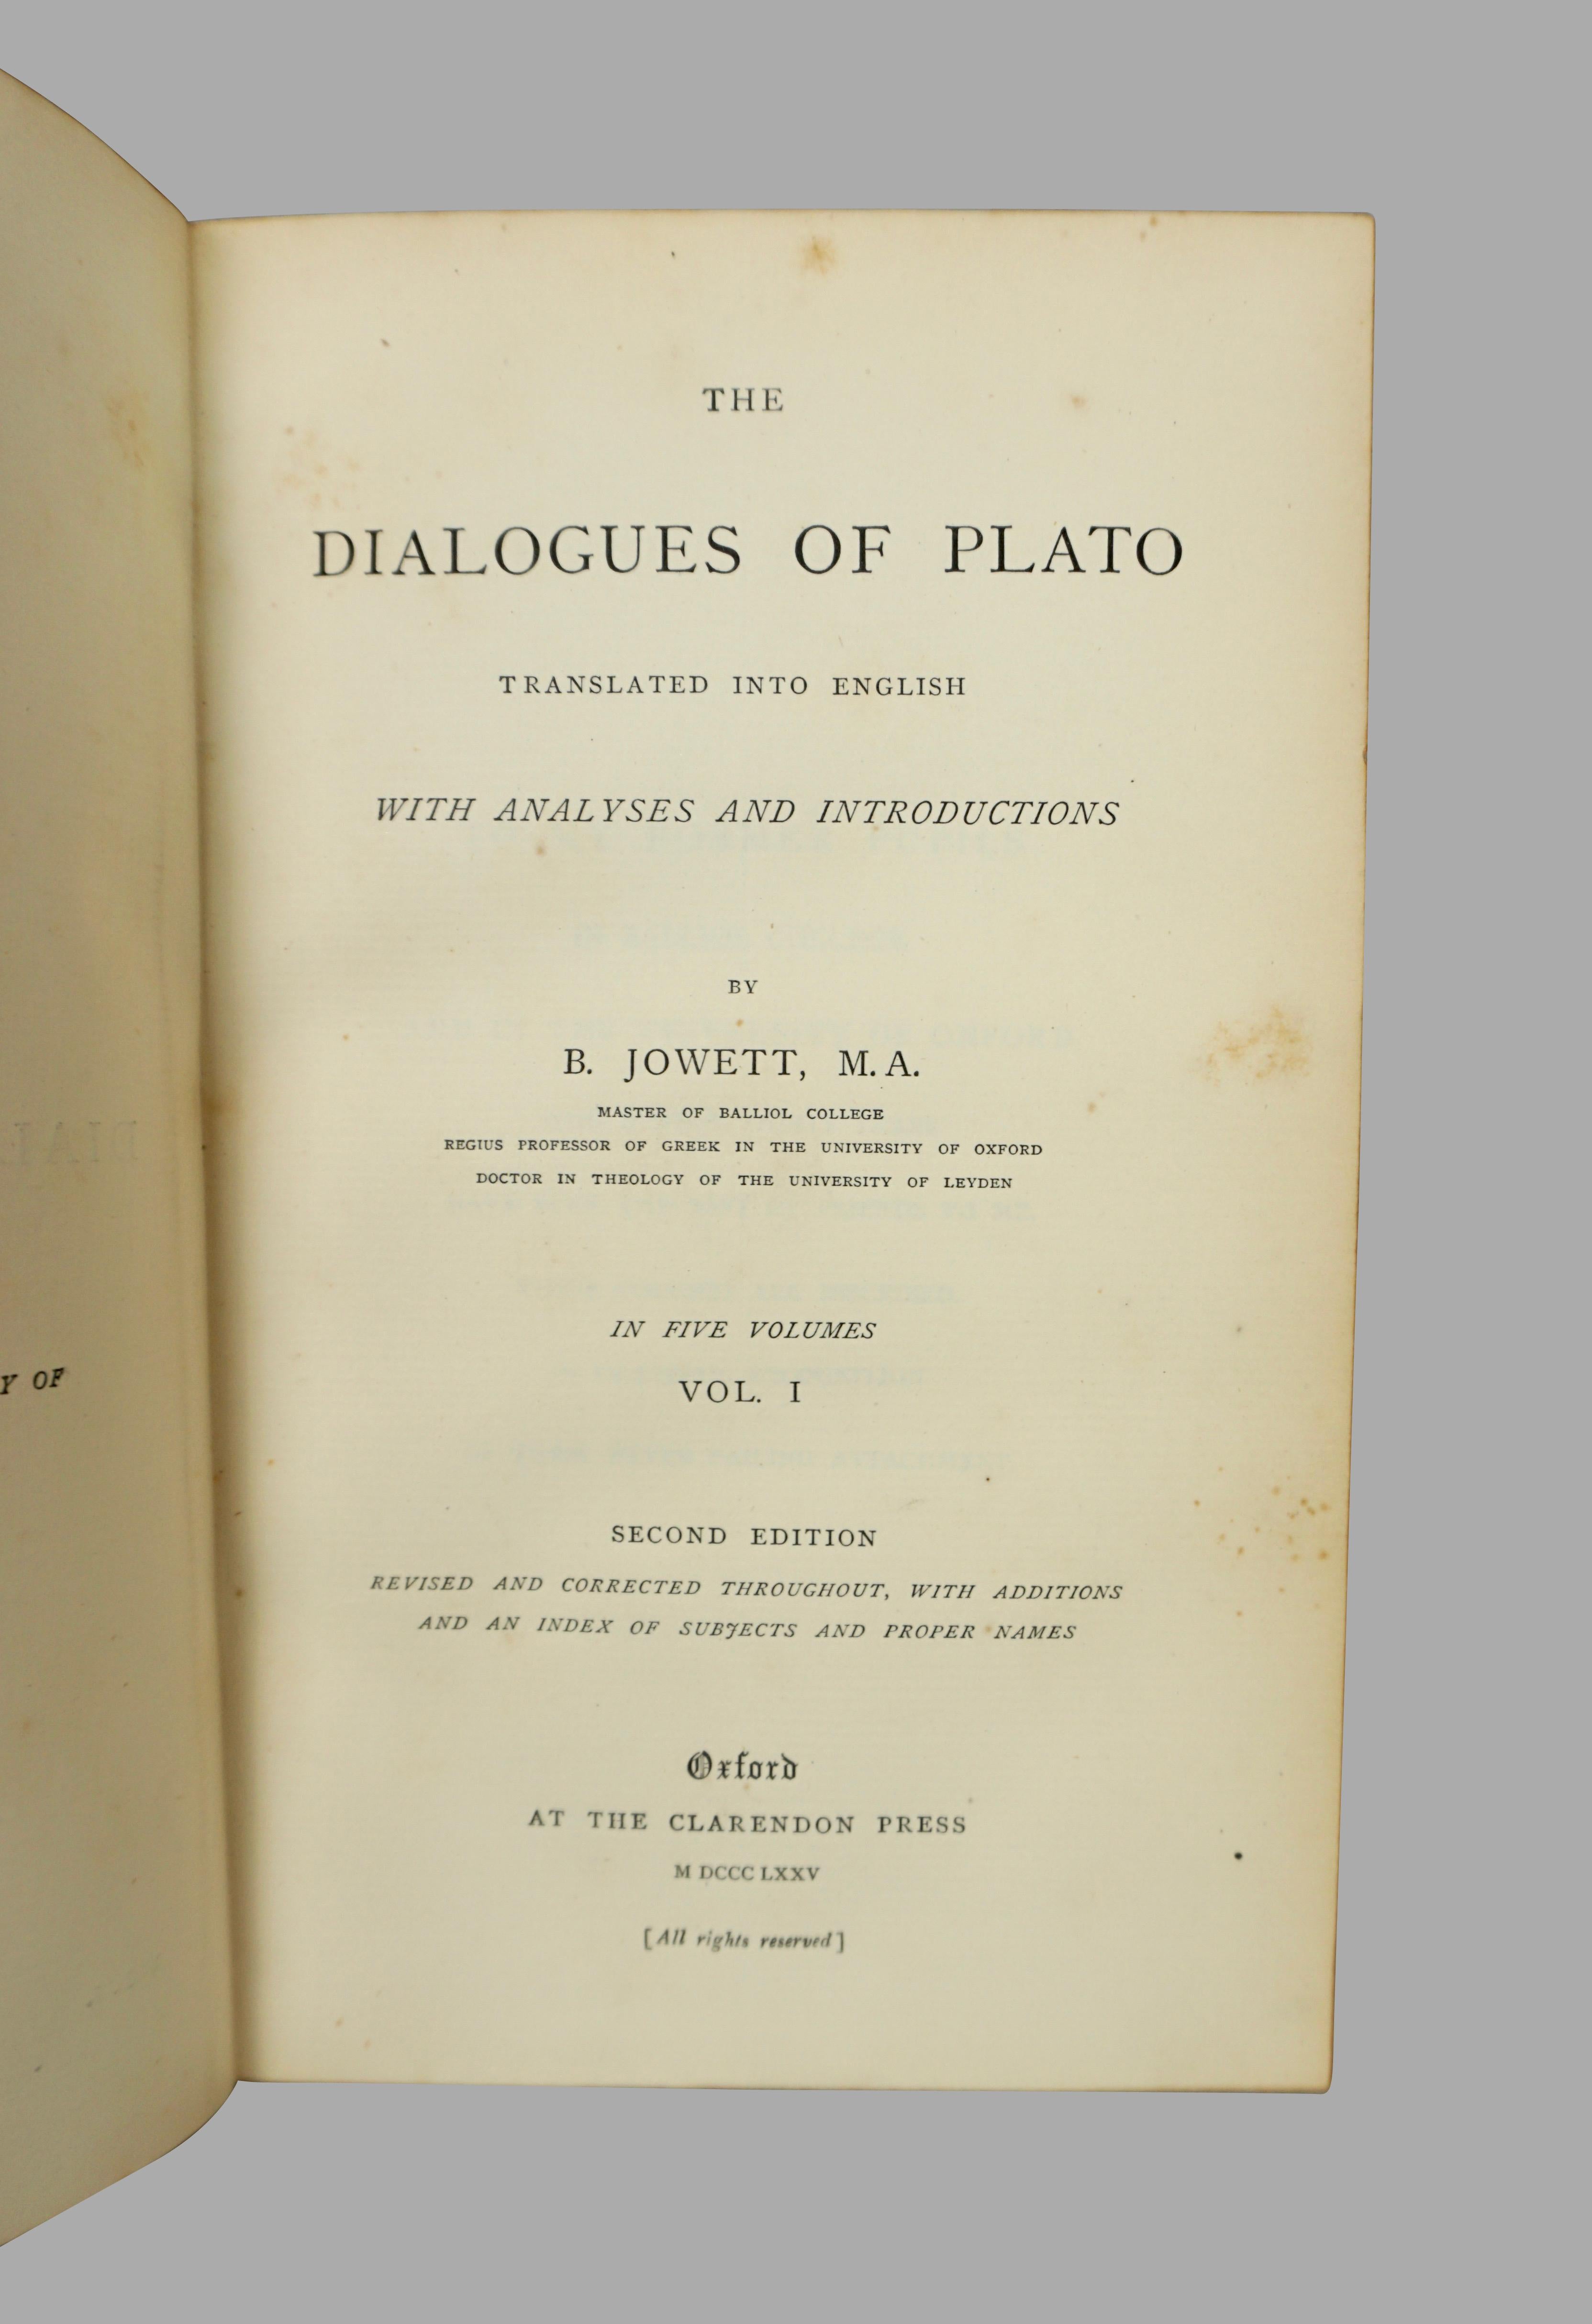 The Dialogues of Plato in 5 Elegant Full Leather Bound Volumes 1